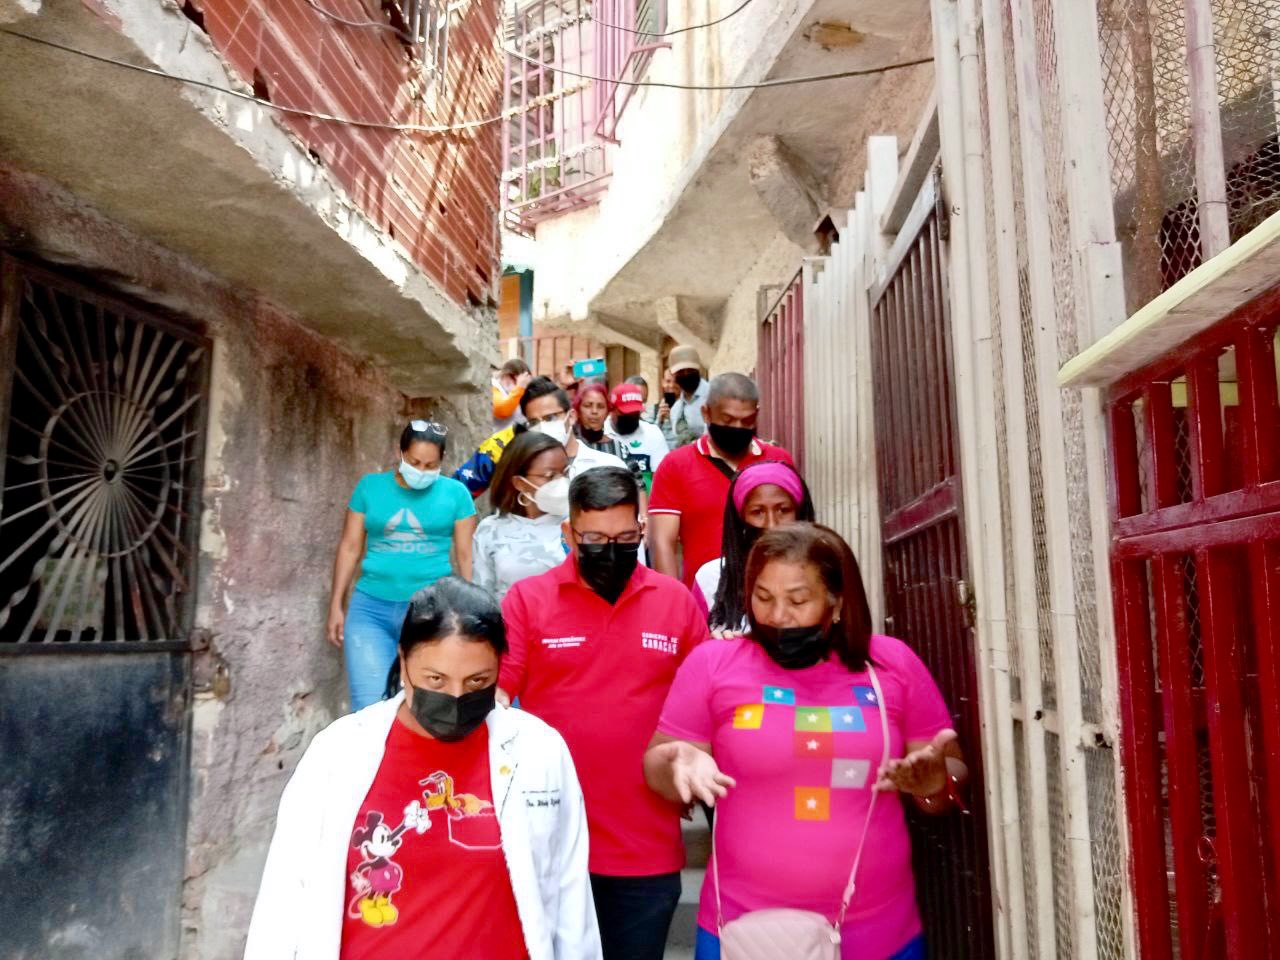 They held a social day in the Sucre parish of Caracas